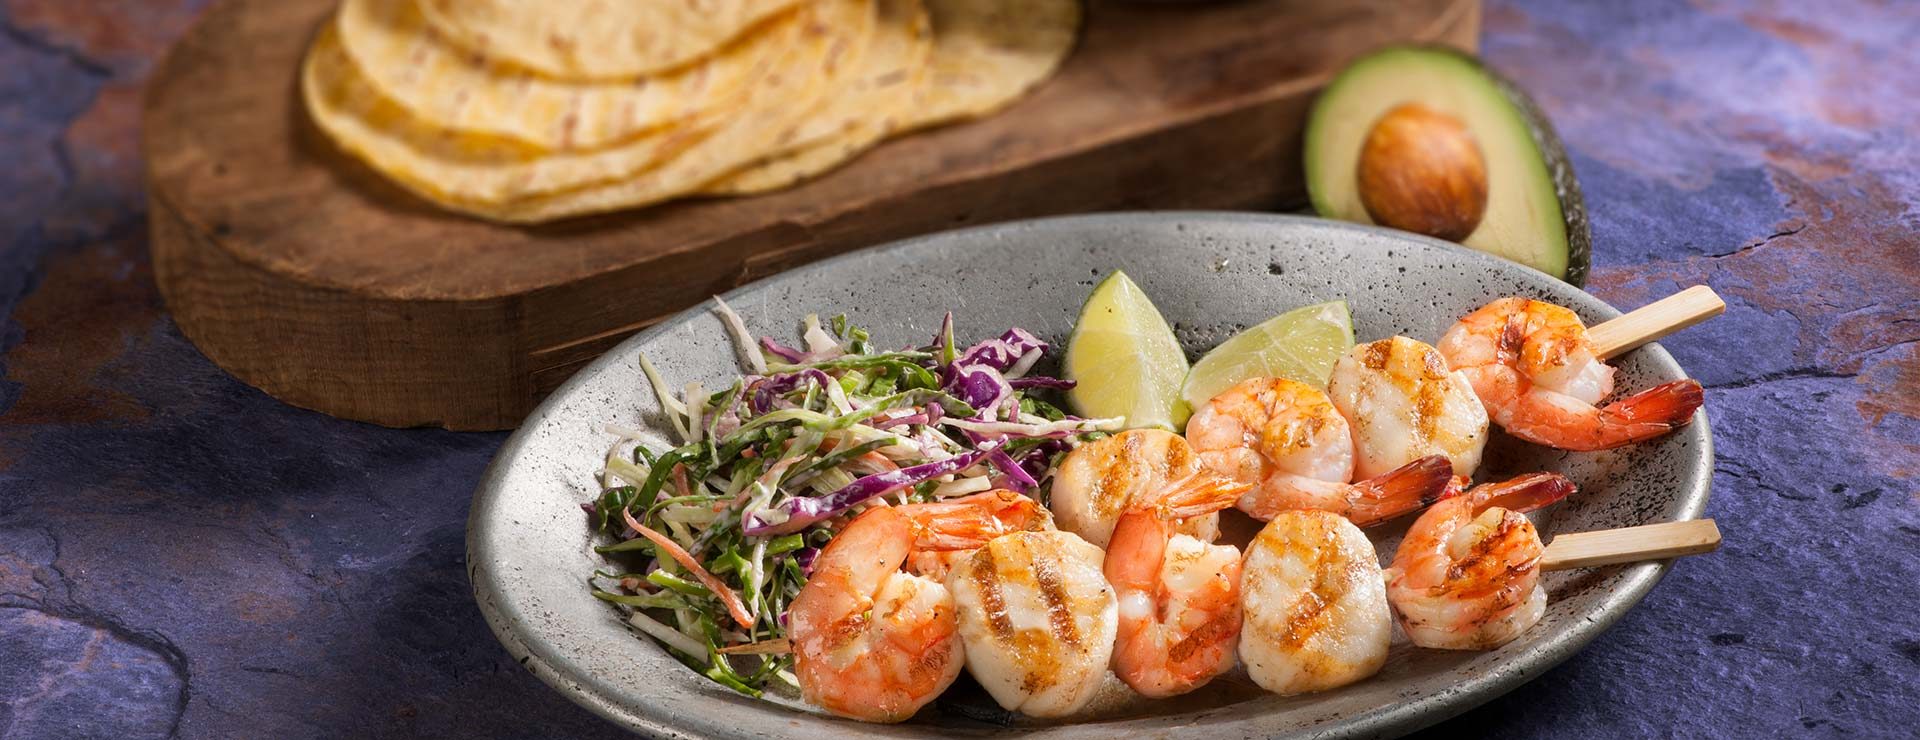 Grilled Shrimp and Scallop Tacos